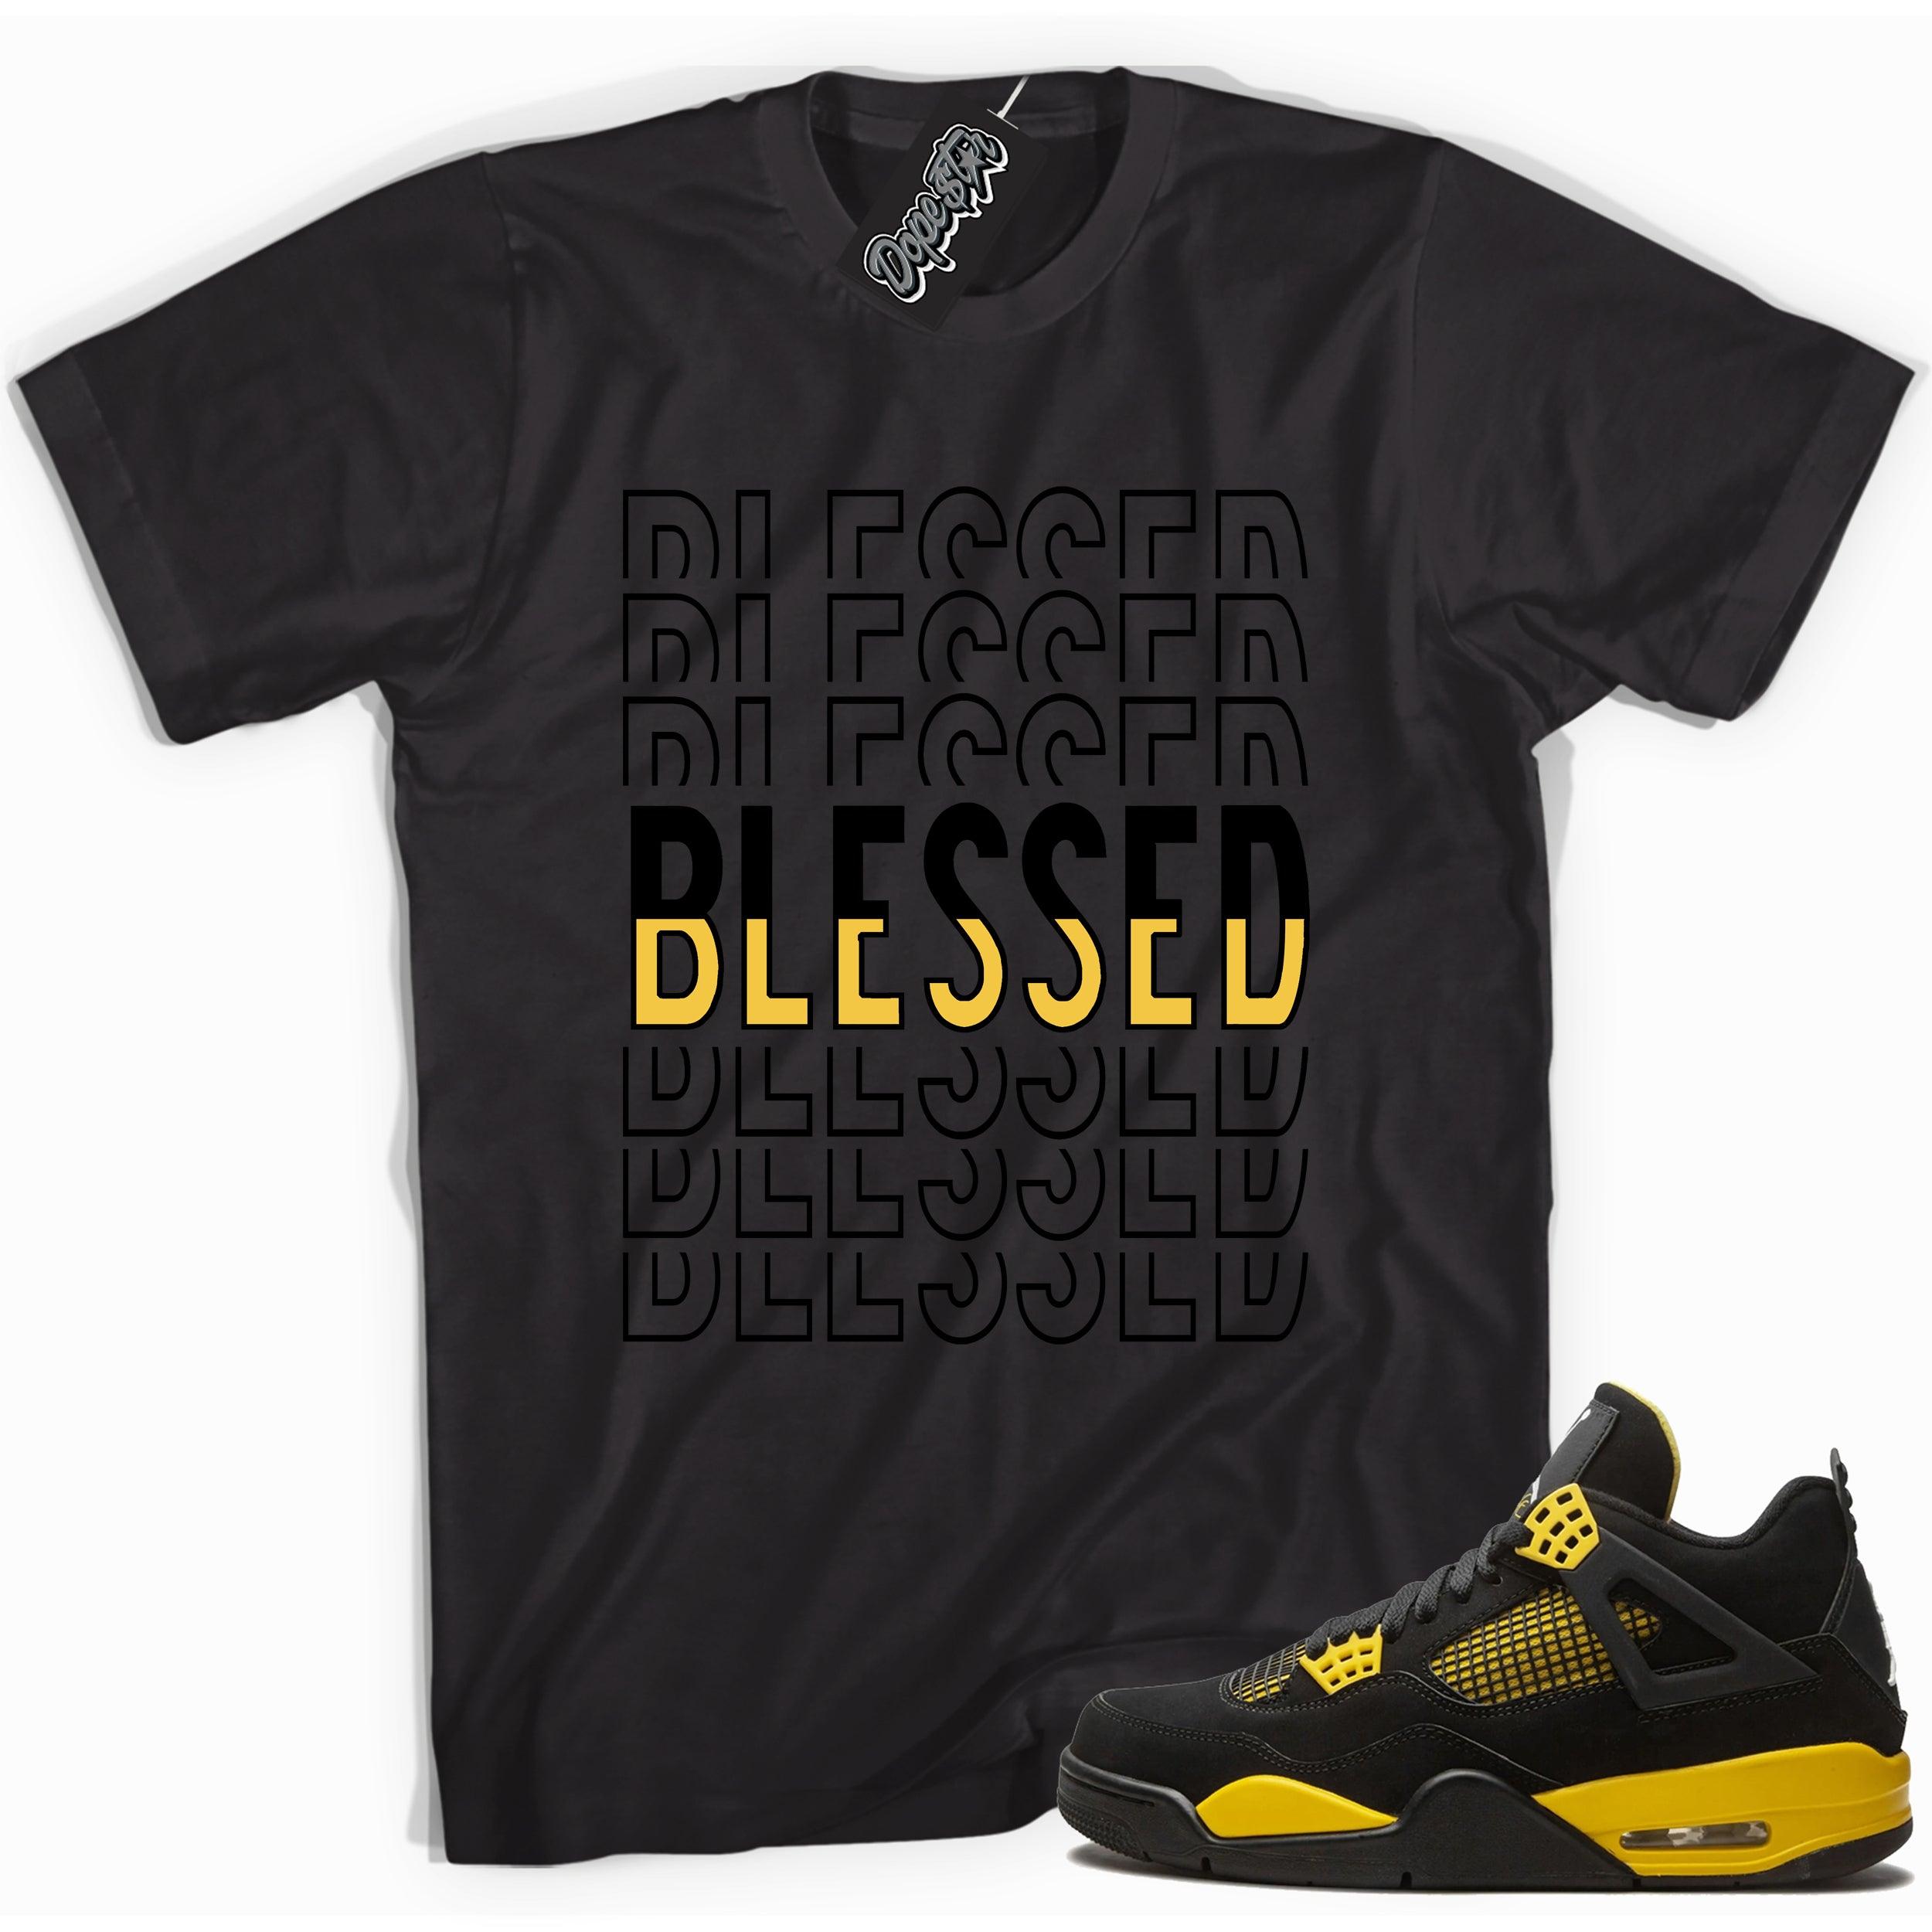 Cool black graphic tee with 'blessed' print, that perfectly matches  Air Jordan 4 Thunder sneakers